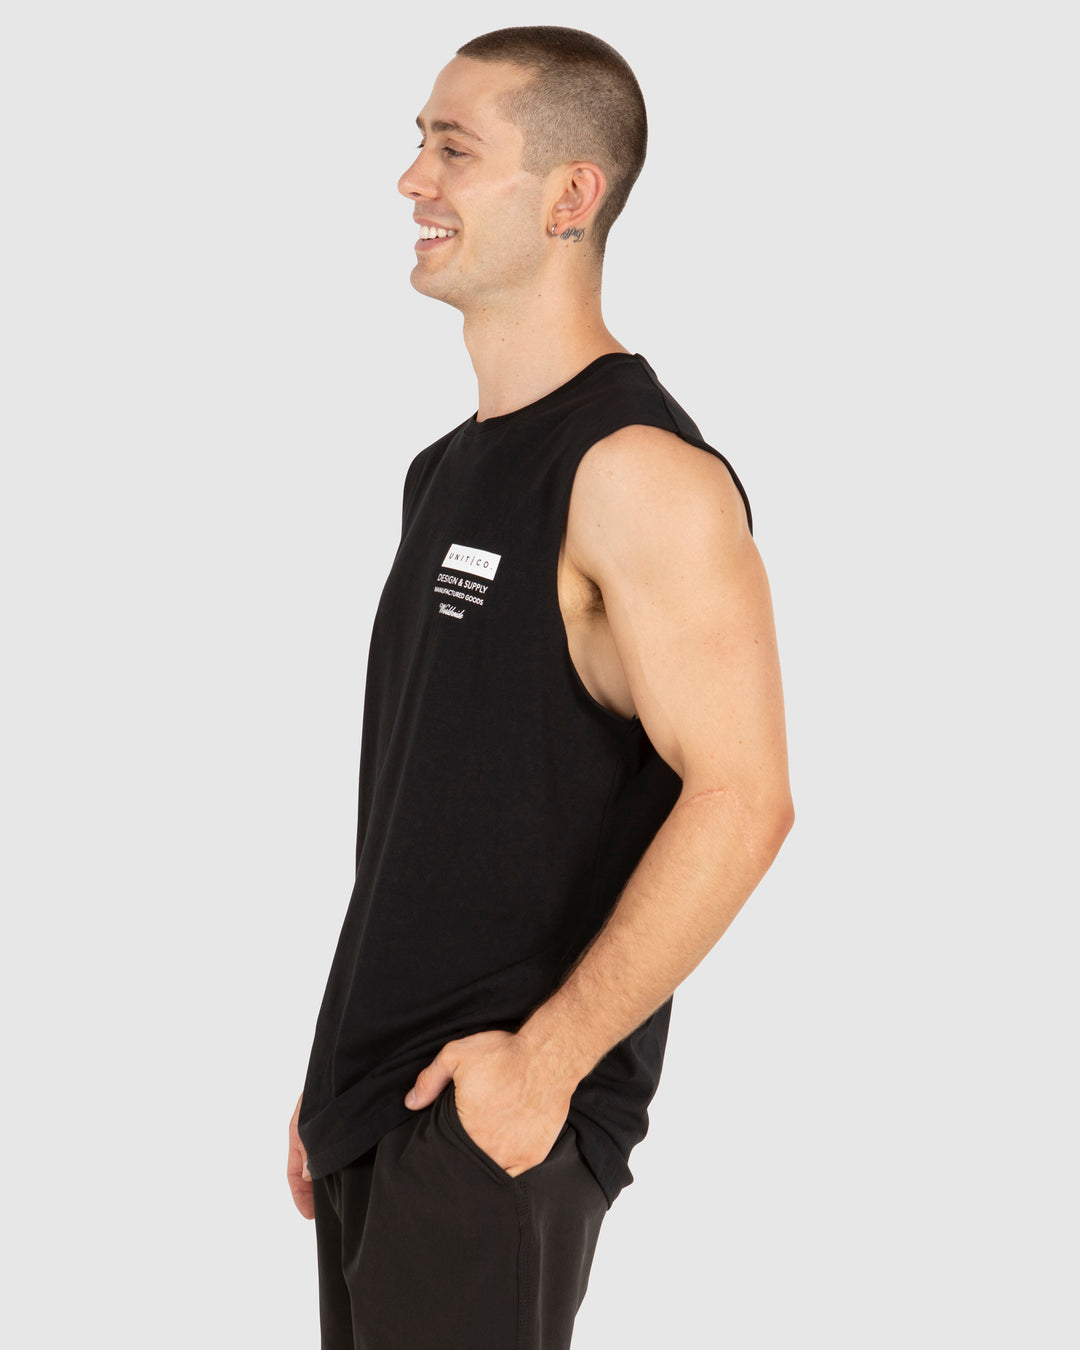 UNIT Mens Plate Muscle Tee